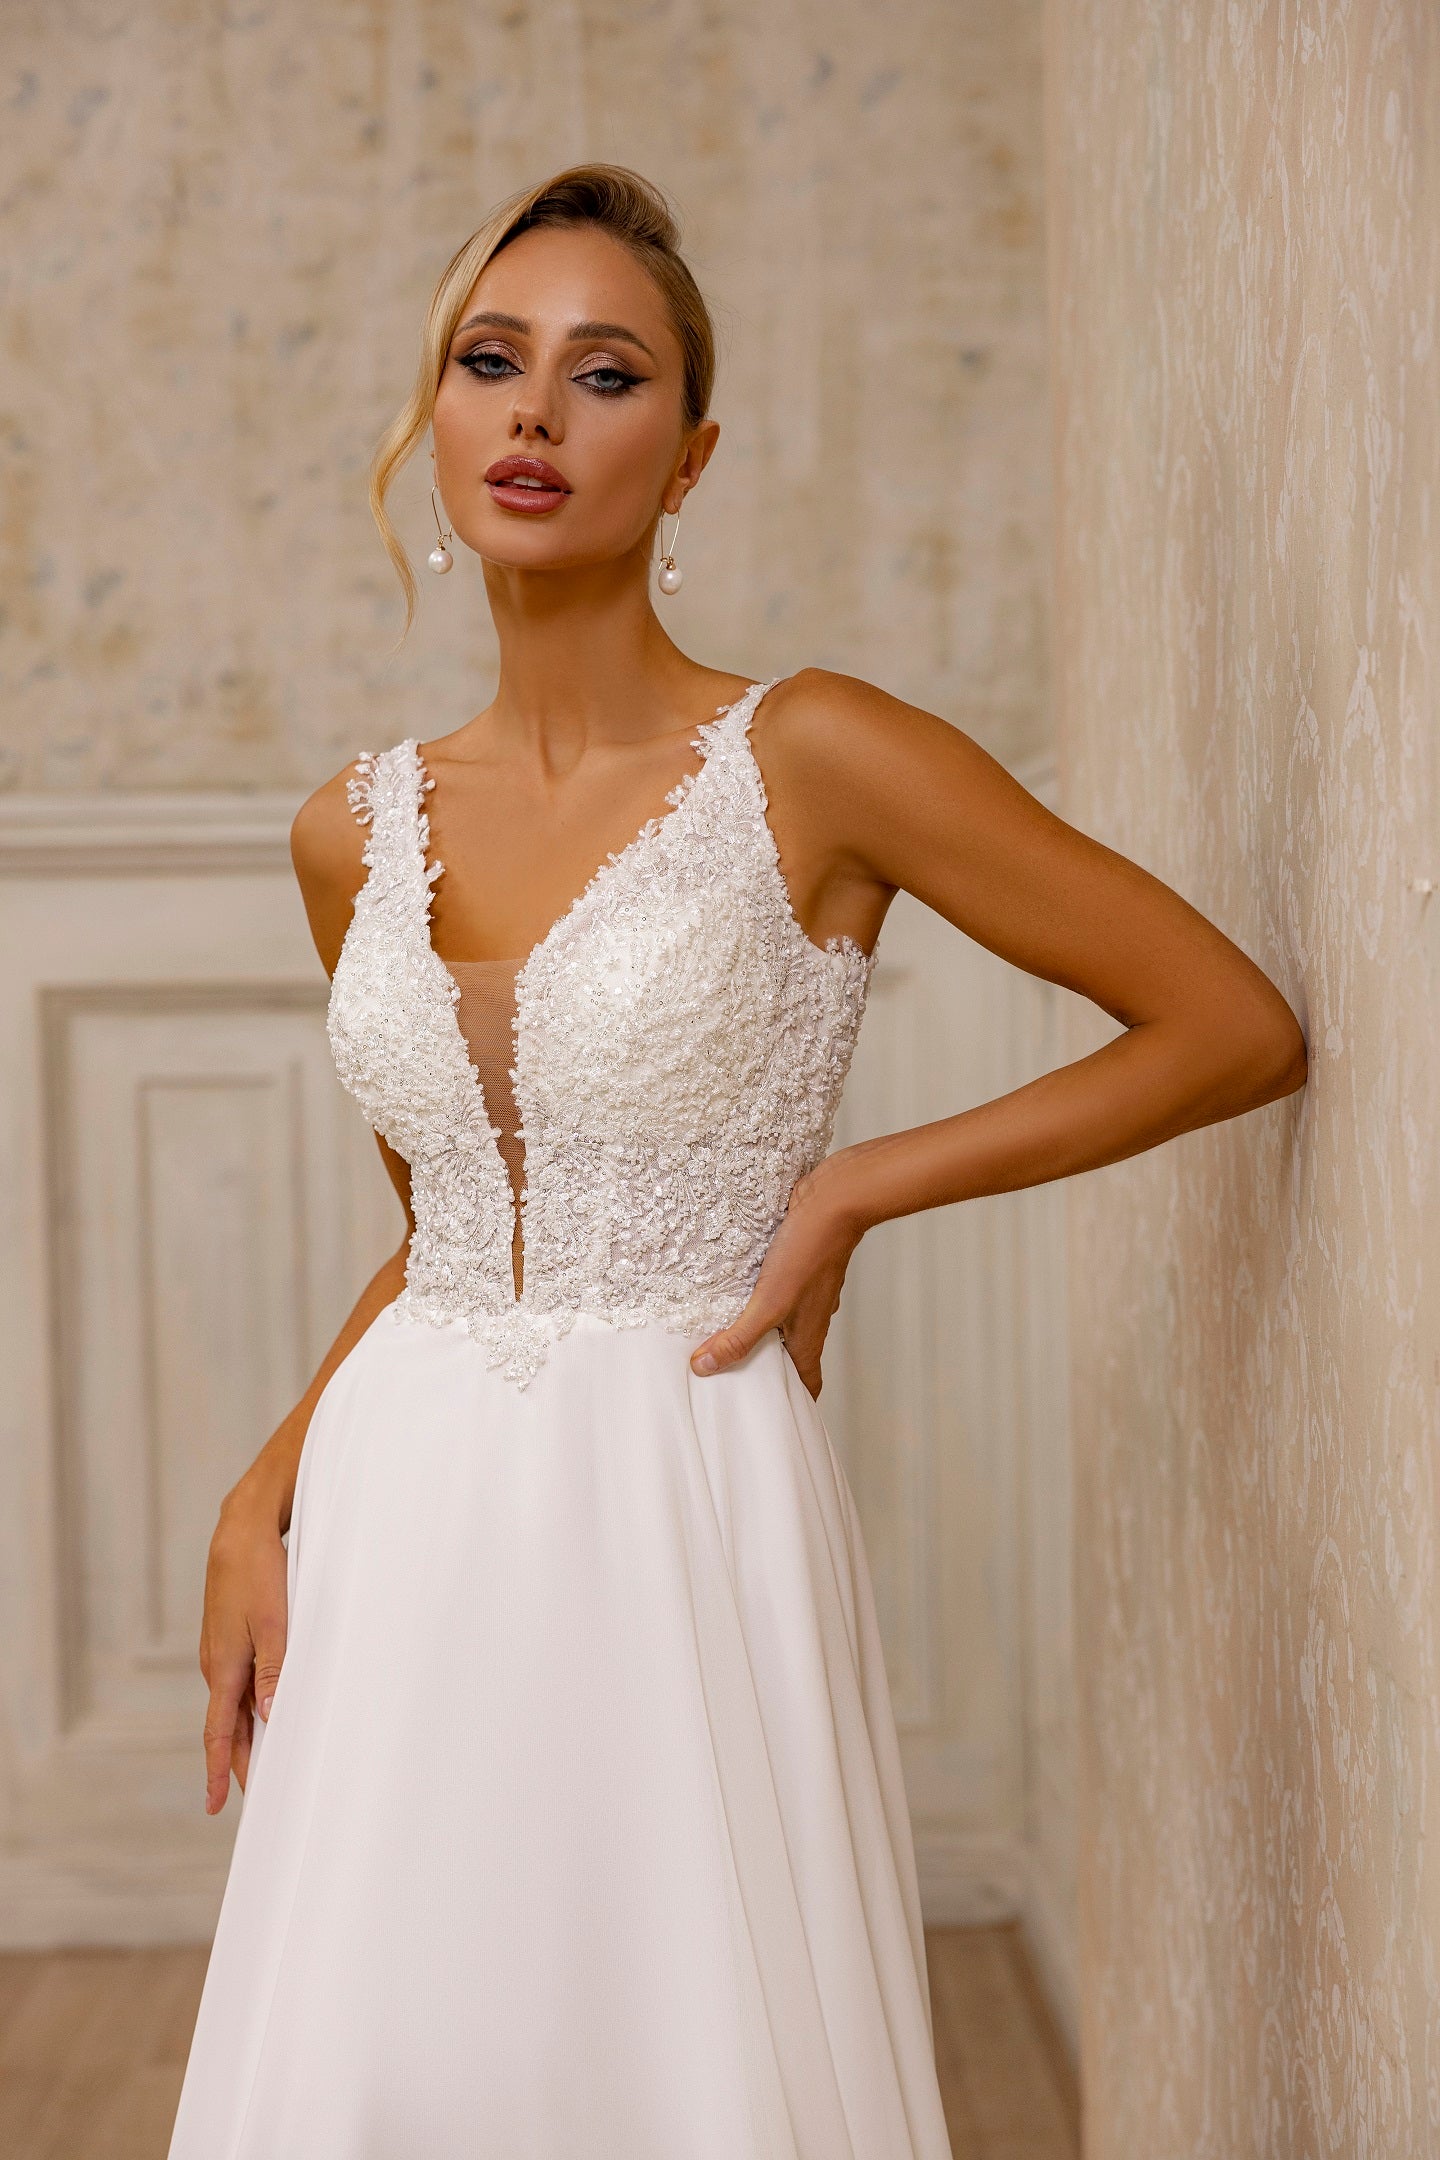 Floral Top Sleeveless A-Line V-Neck Wedding Dress With Short Train  